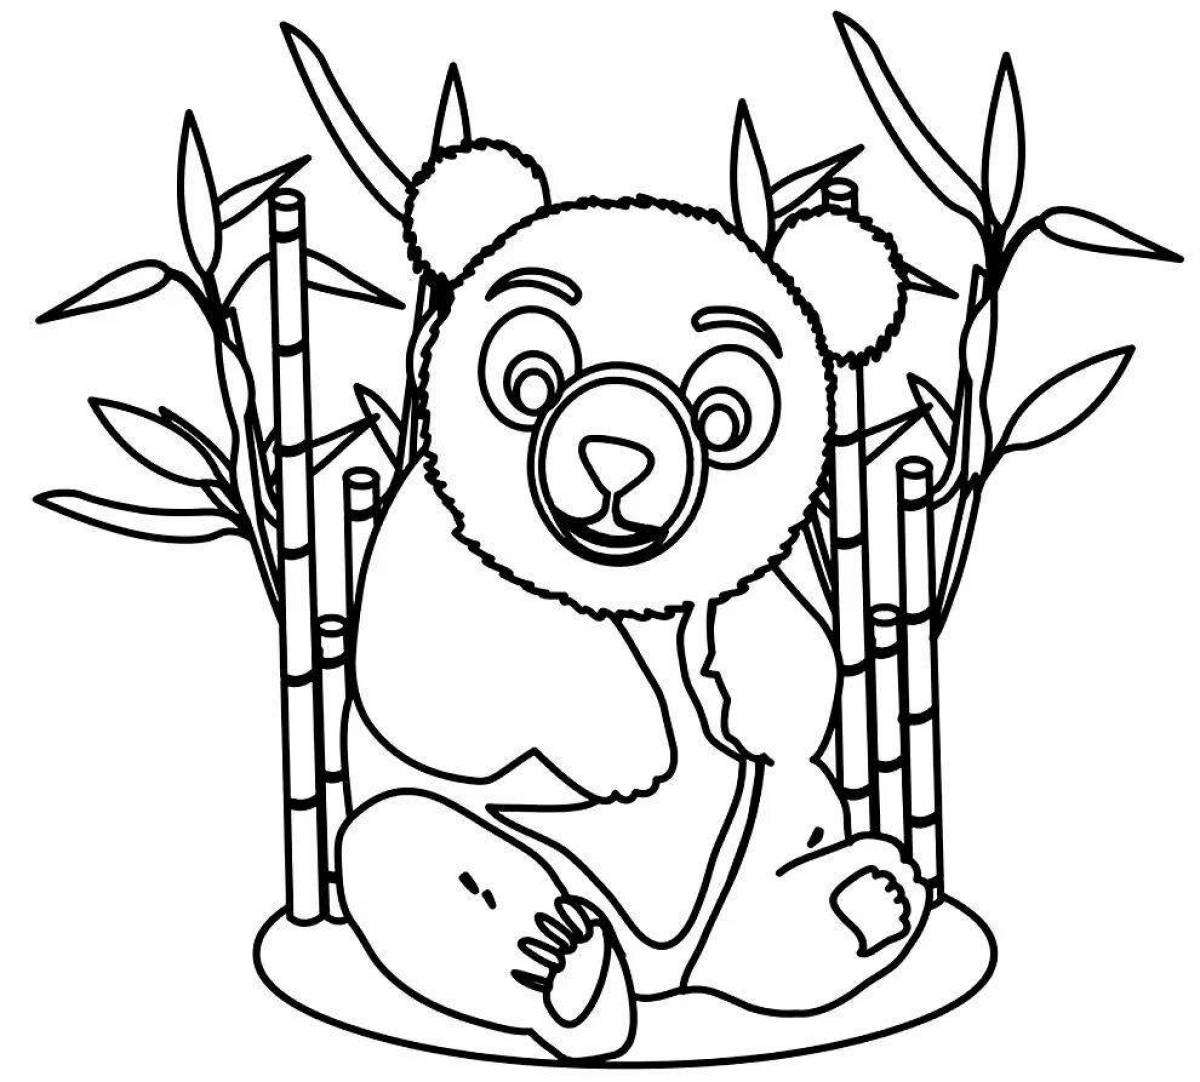 Outstanding bamboo panda coloring page